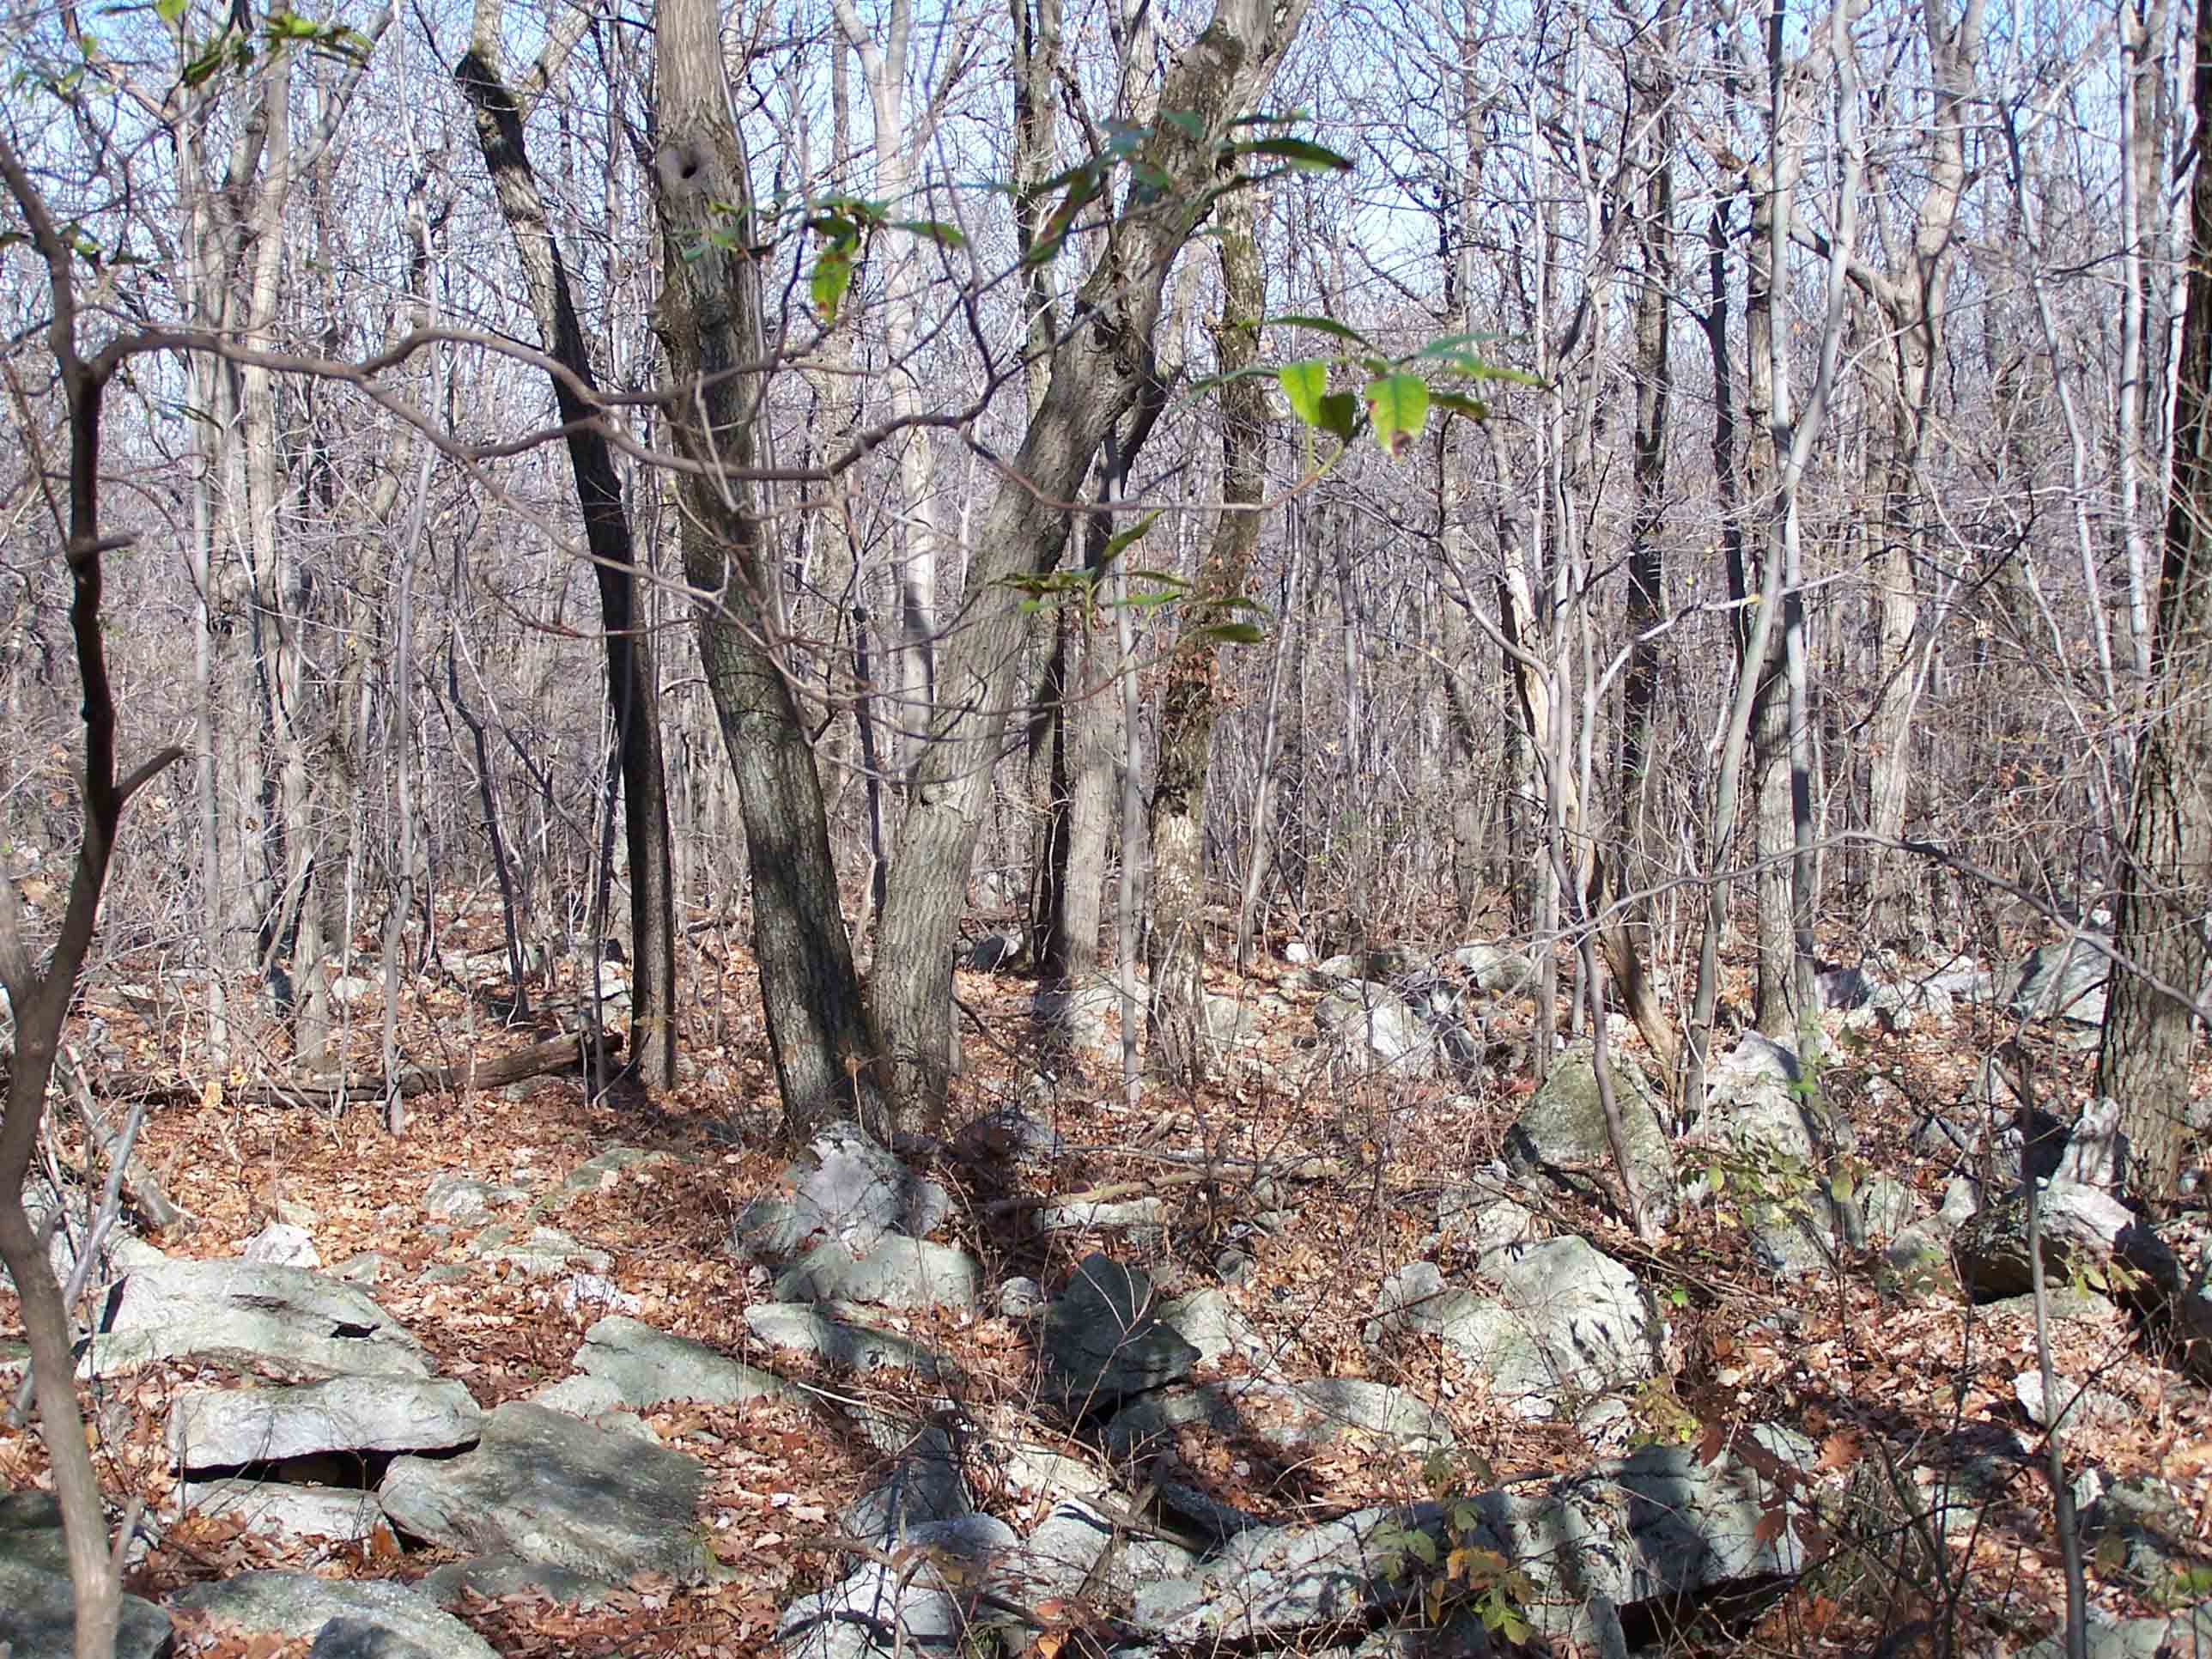 Trail between Lehigh Furnace Gap and Bake Oven Knob. Courtesy at@rohland.org